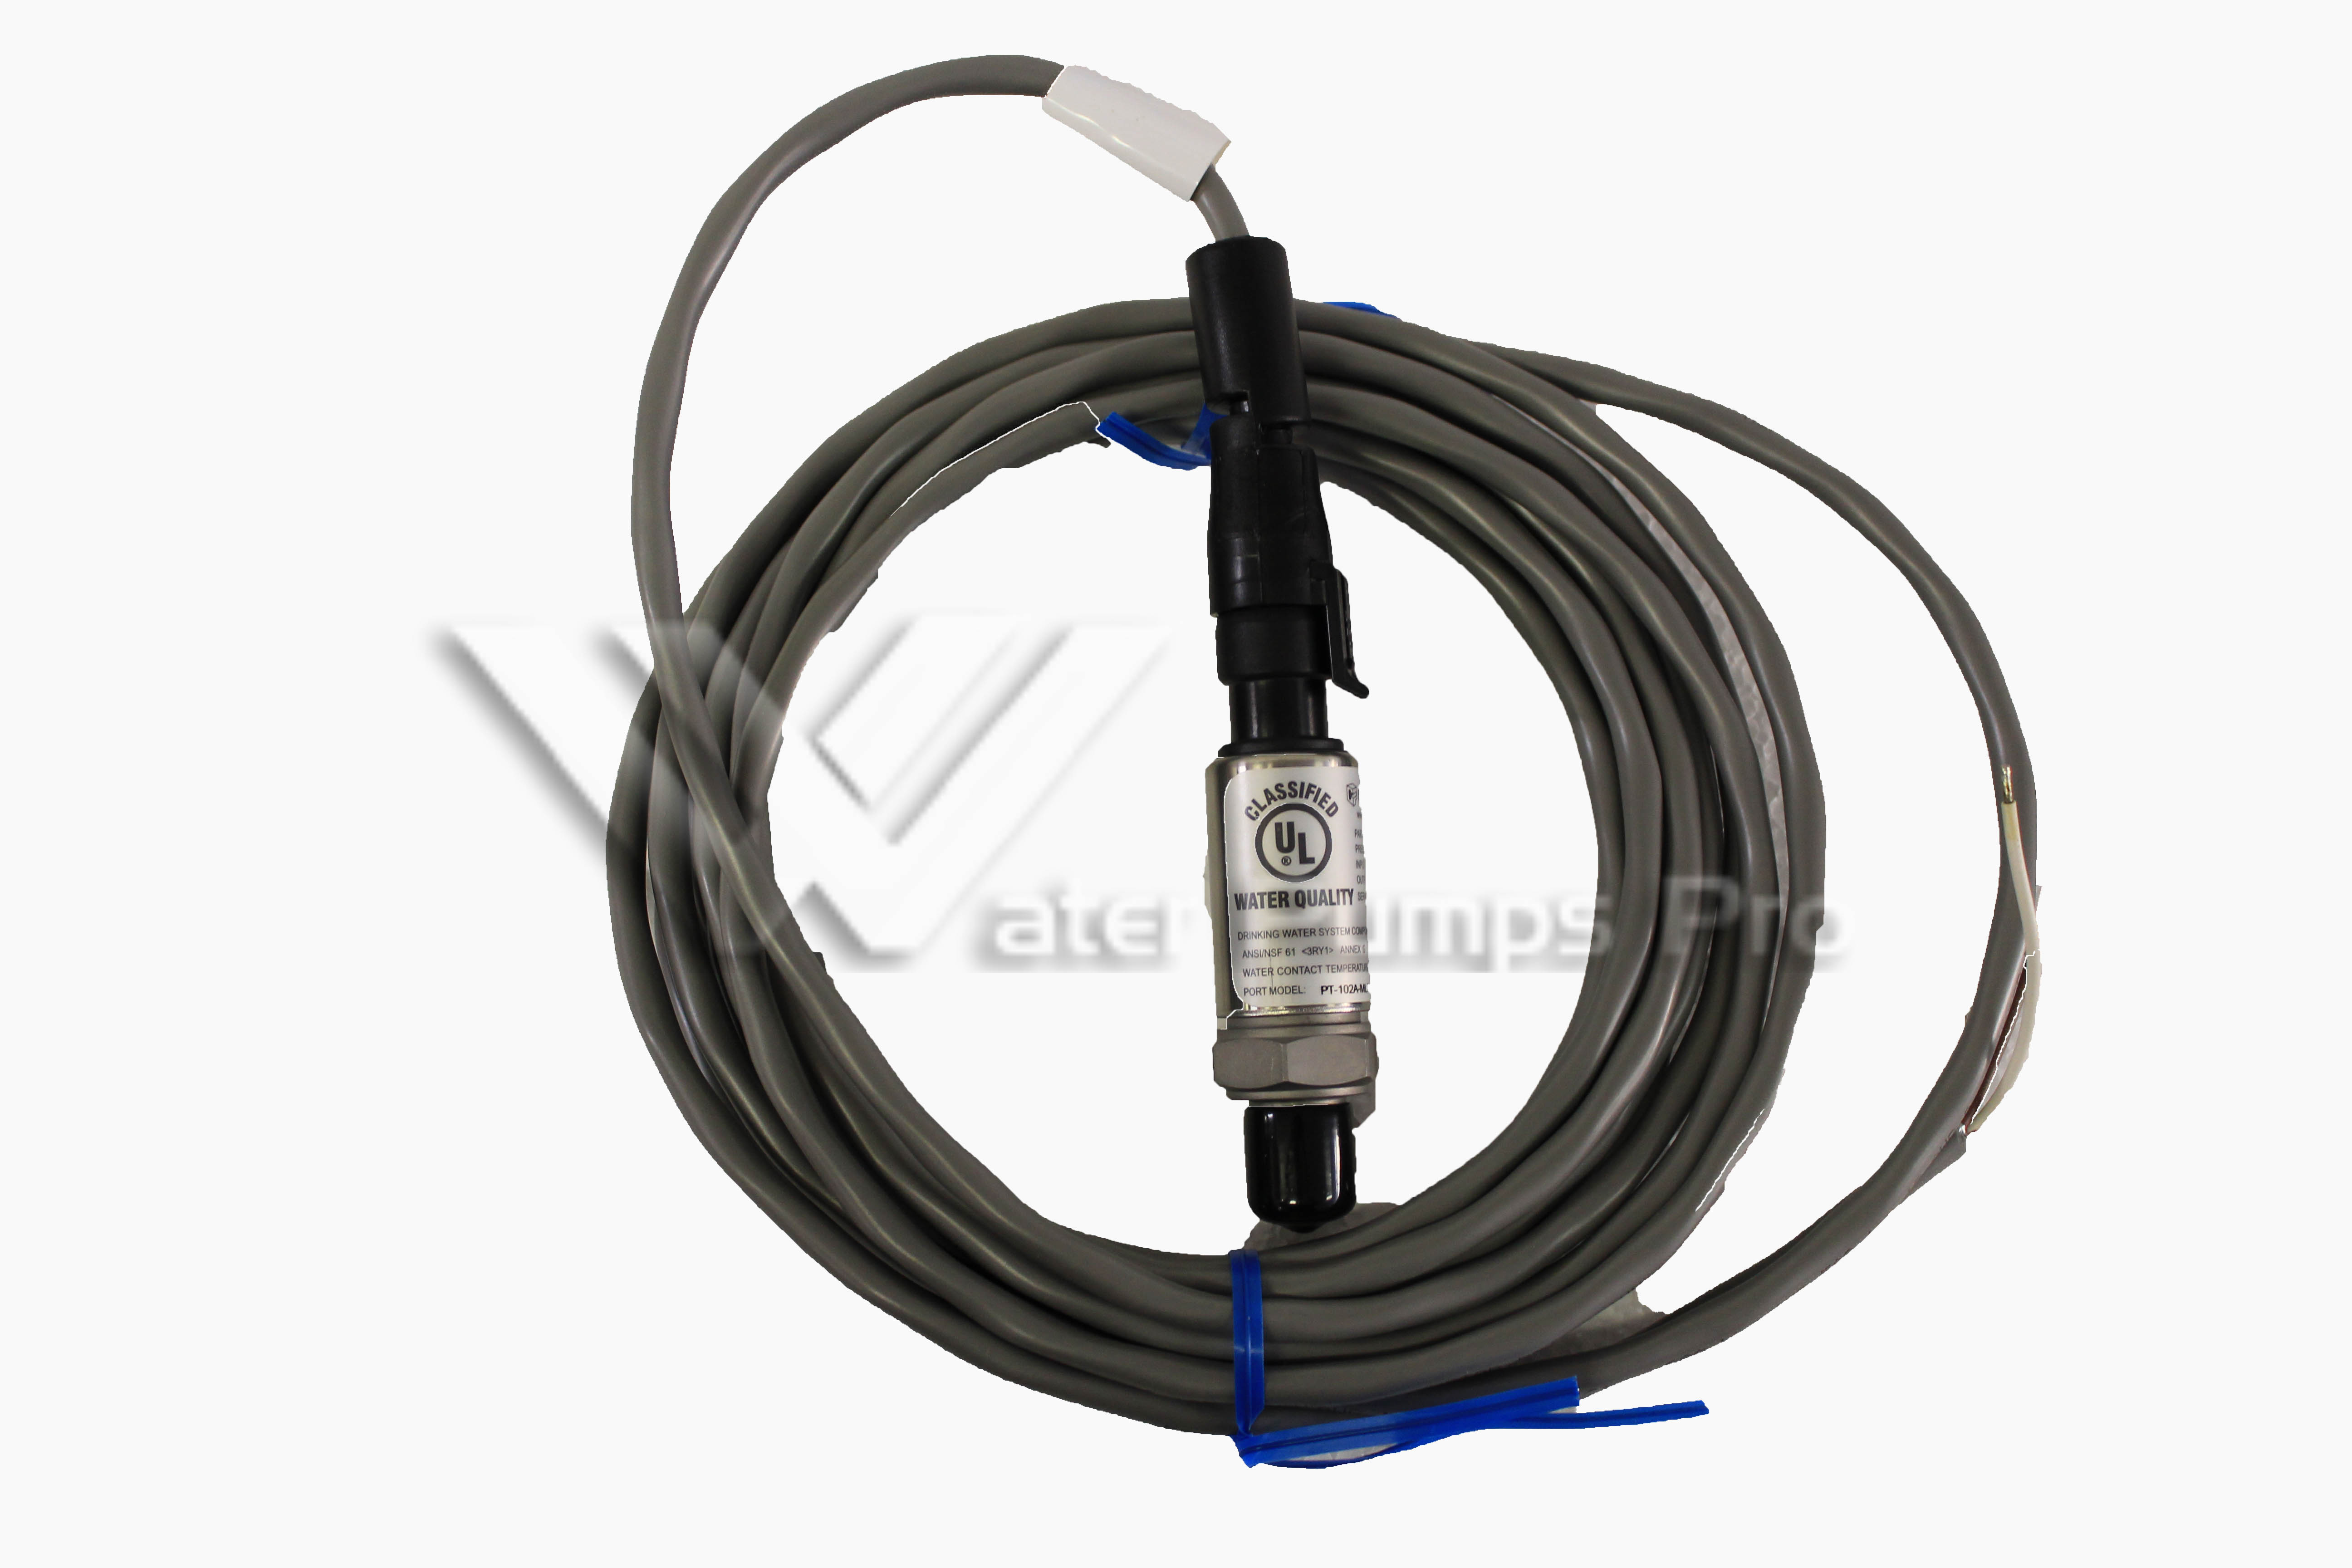 Goulds 9K391 300 psi Transducer 0.5-4.5V and 200 inch Cable